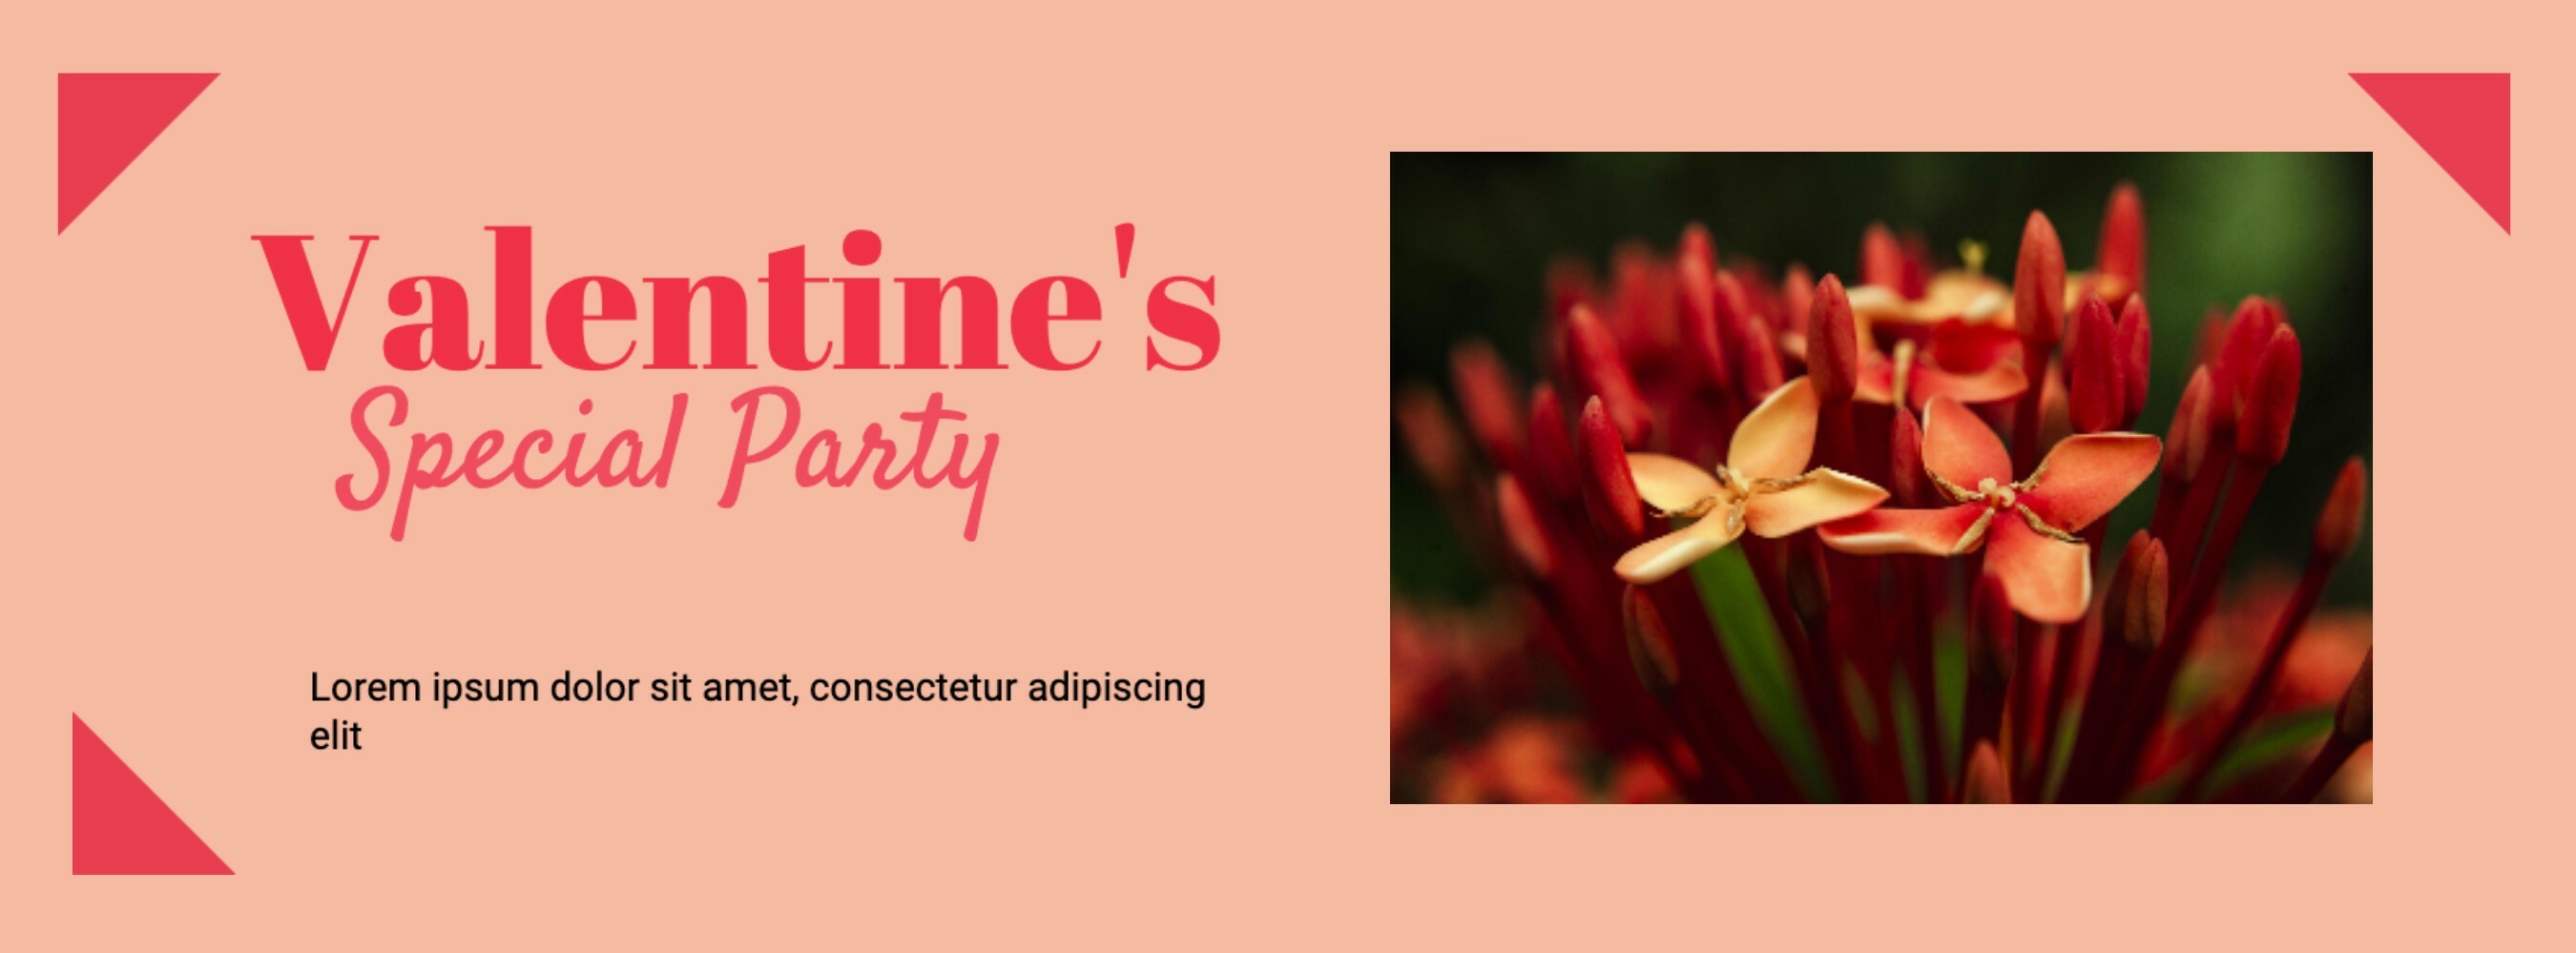 Valentine's Special Party Promo template